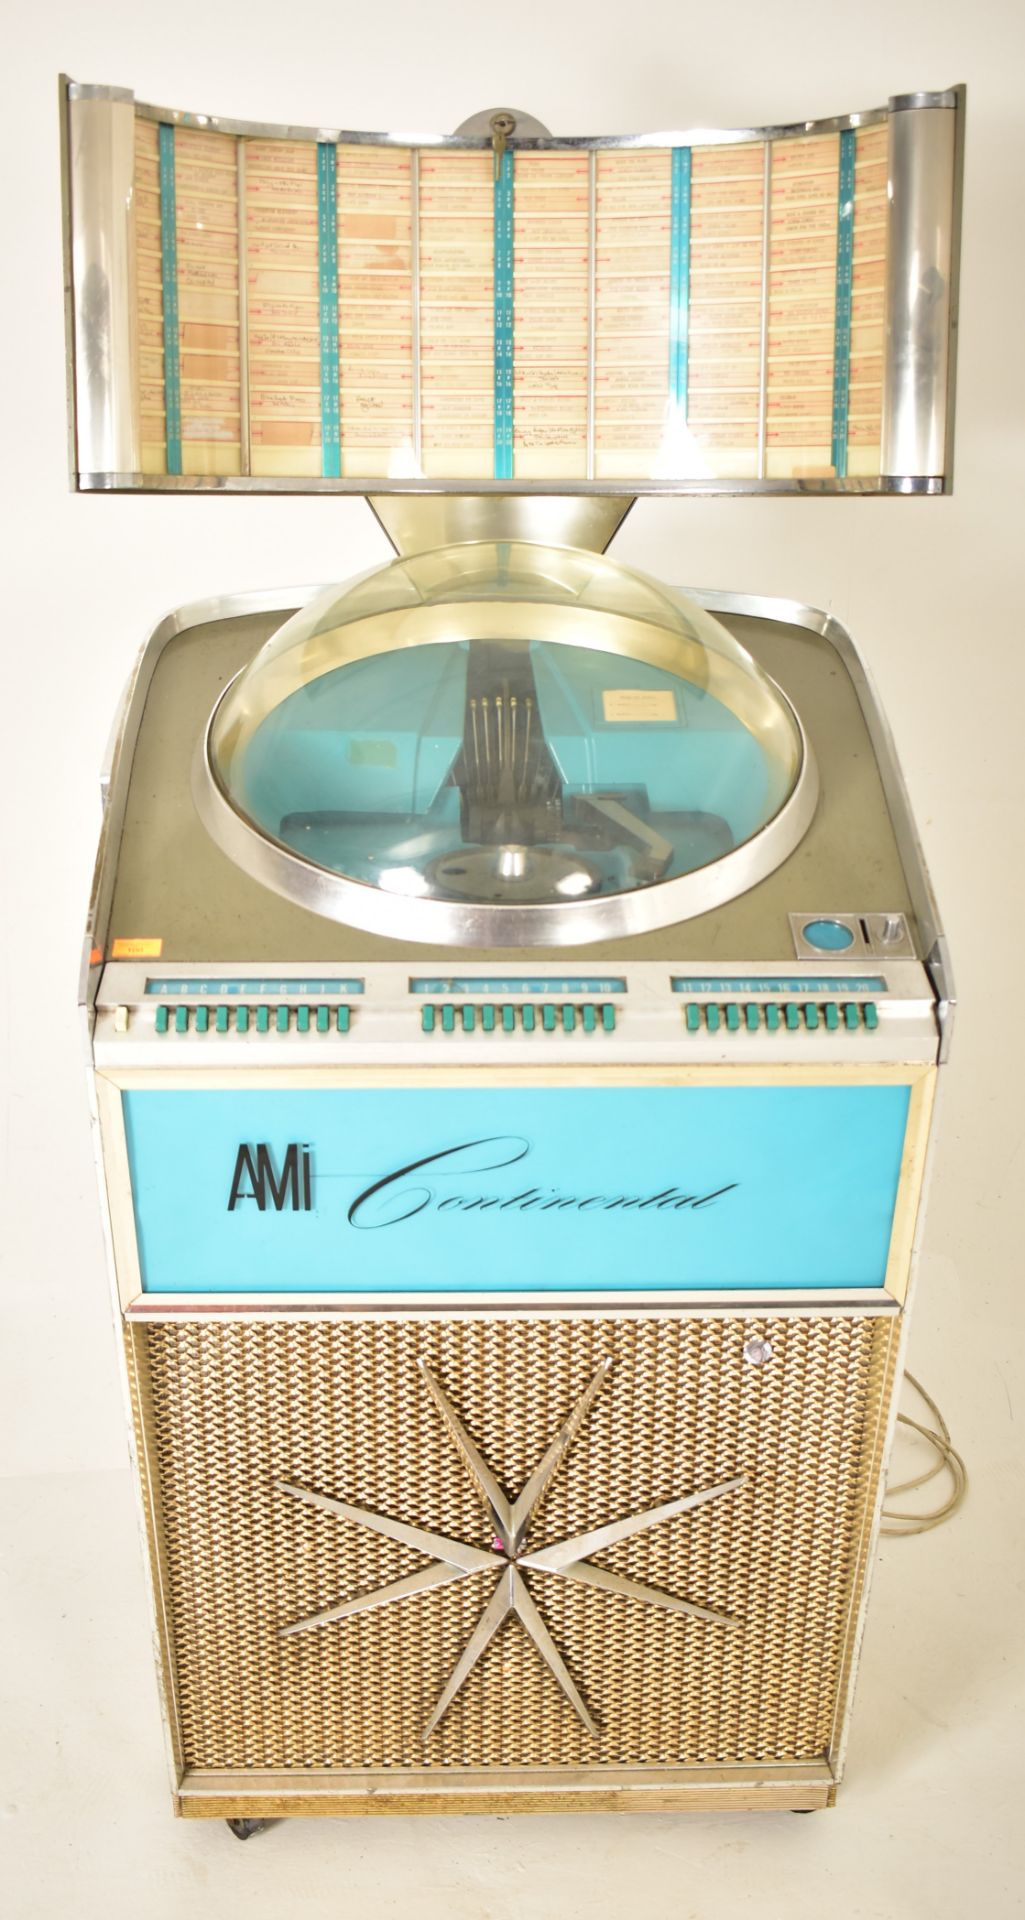 ROWE AMI CONTINENTAL 1 20TH CENTURY JUKEBOX - Image 5 of 15